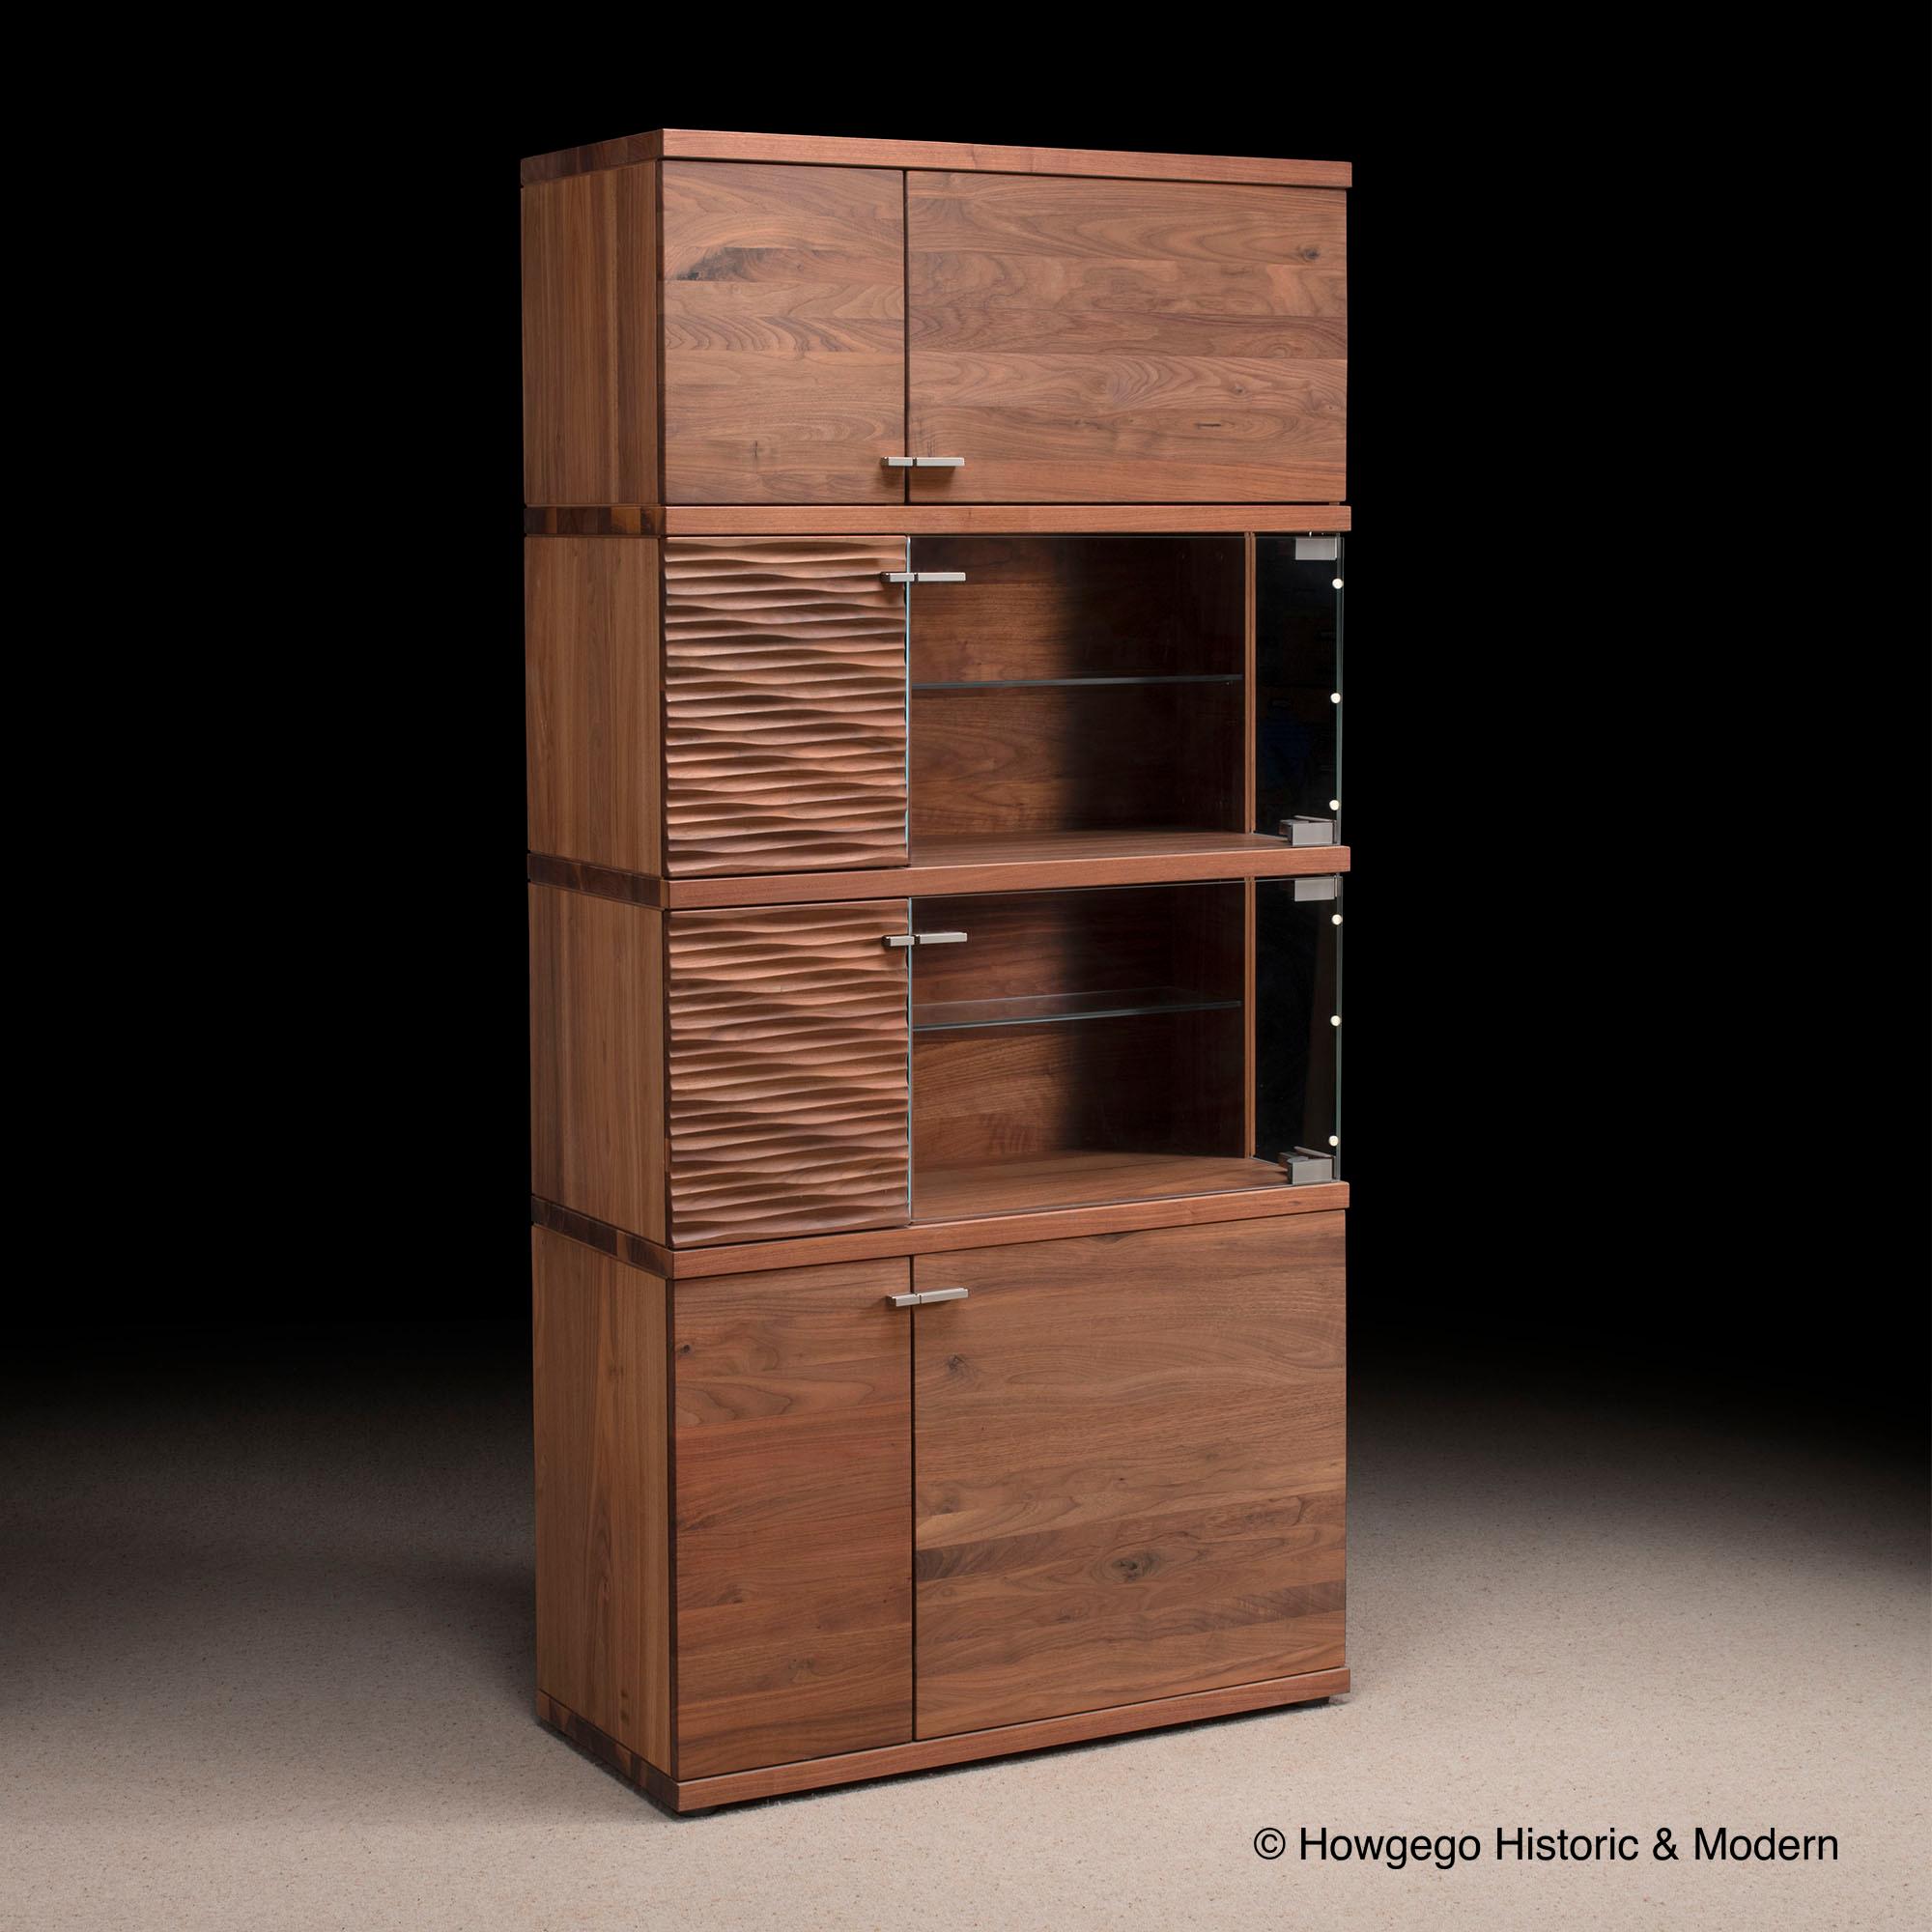 Xenia, 4-tier, walnut & glazed, display cabinet or cupboard with led lighting, Venjakob, Germany
The facade comprises eight cupboard doors of varying sizes, two are glazed with LED lights in the interior and another two with crisp ripple